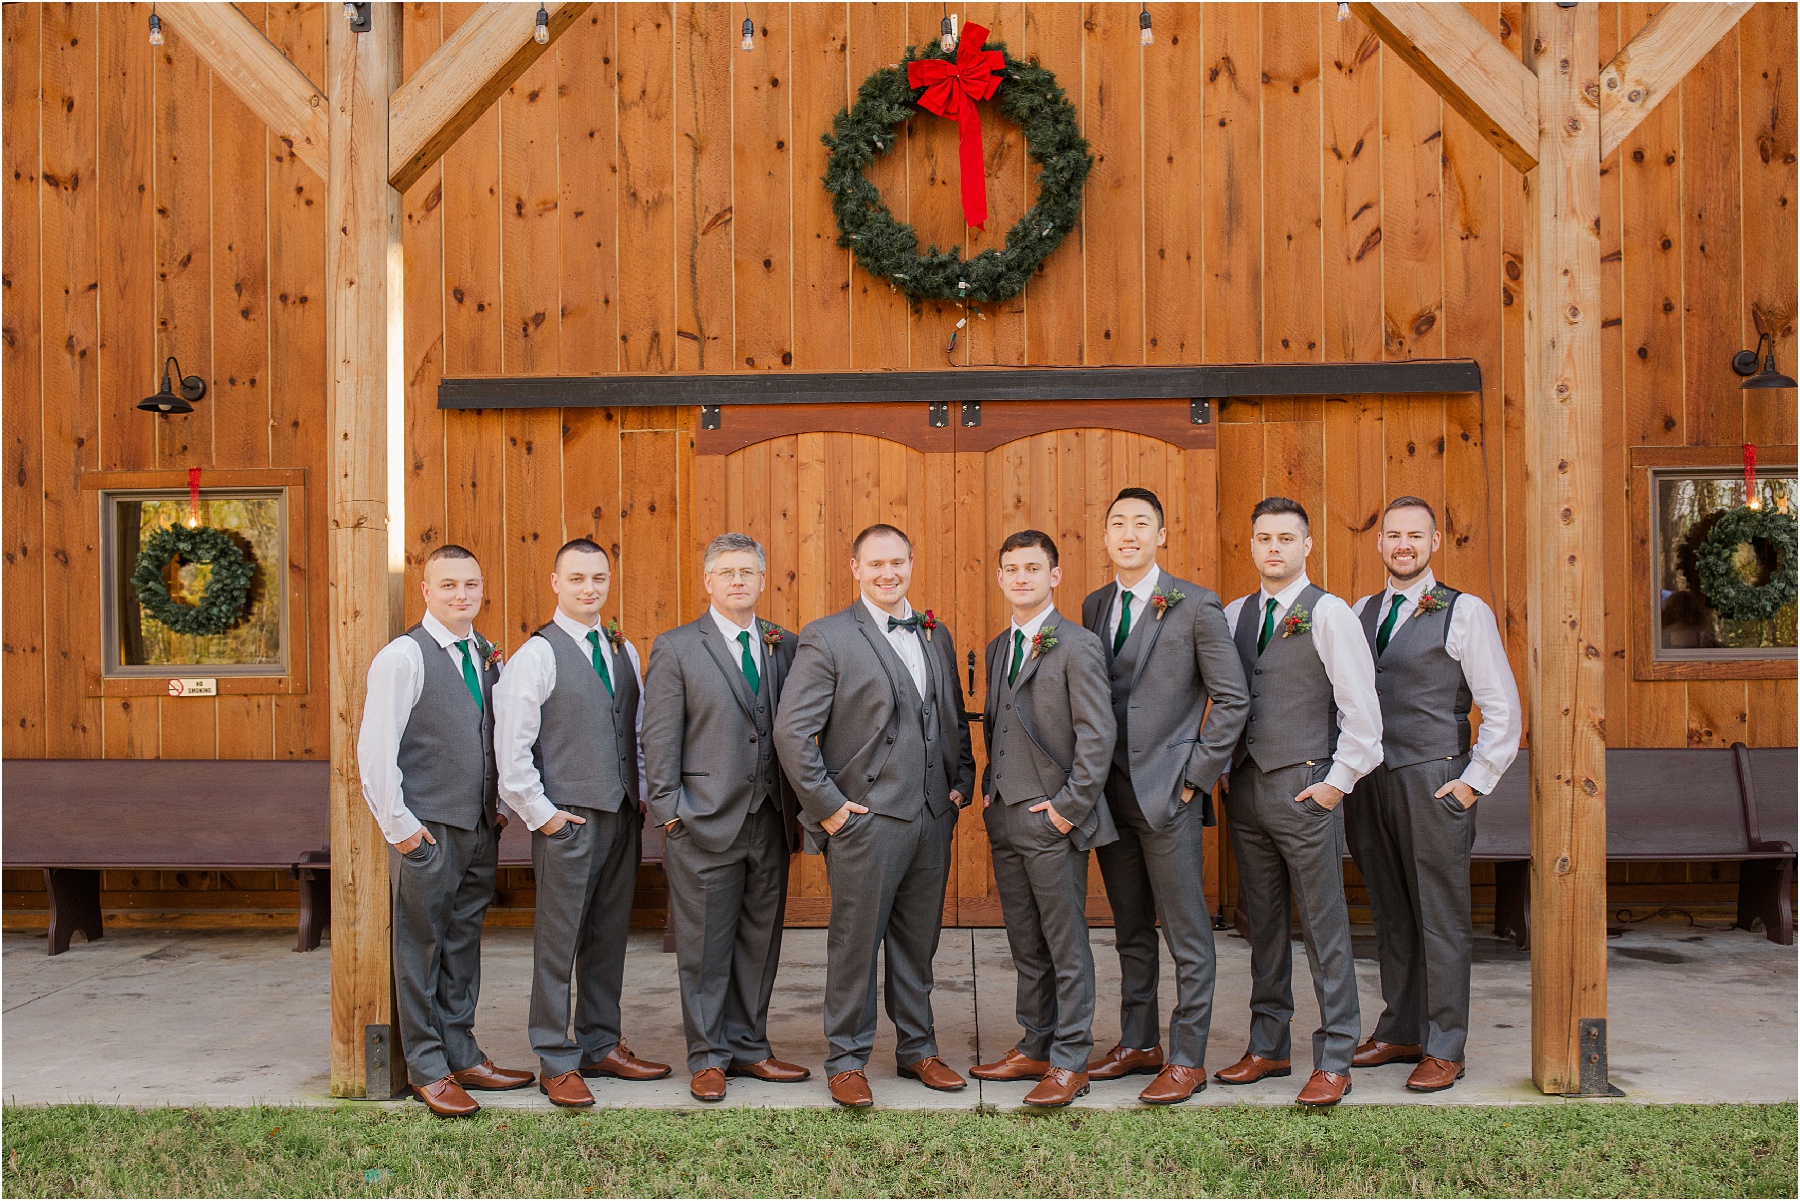 Group of groomsmen in grey standing next to a wooden barn in Greenwood SC